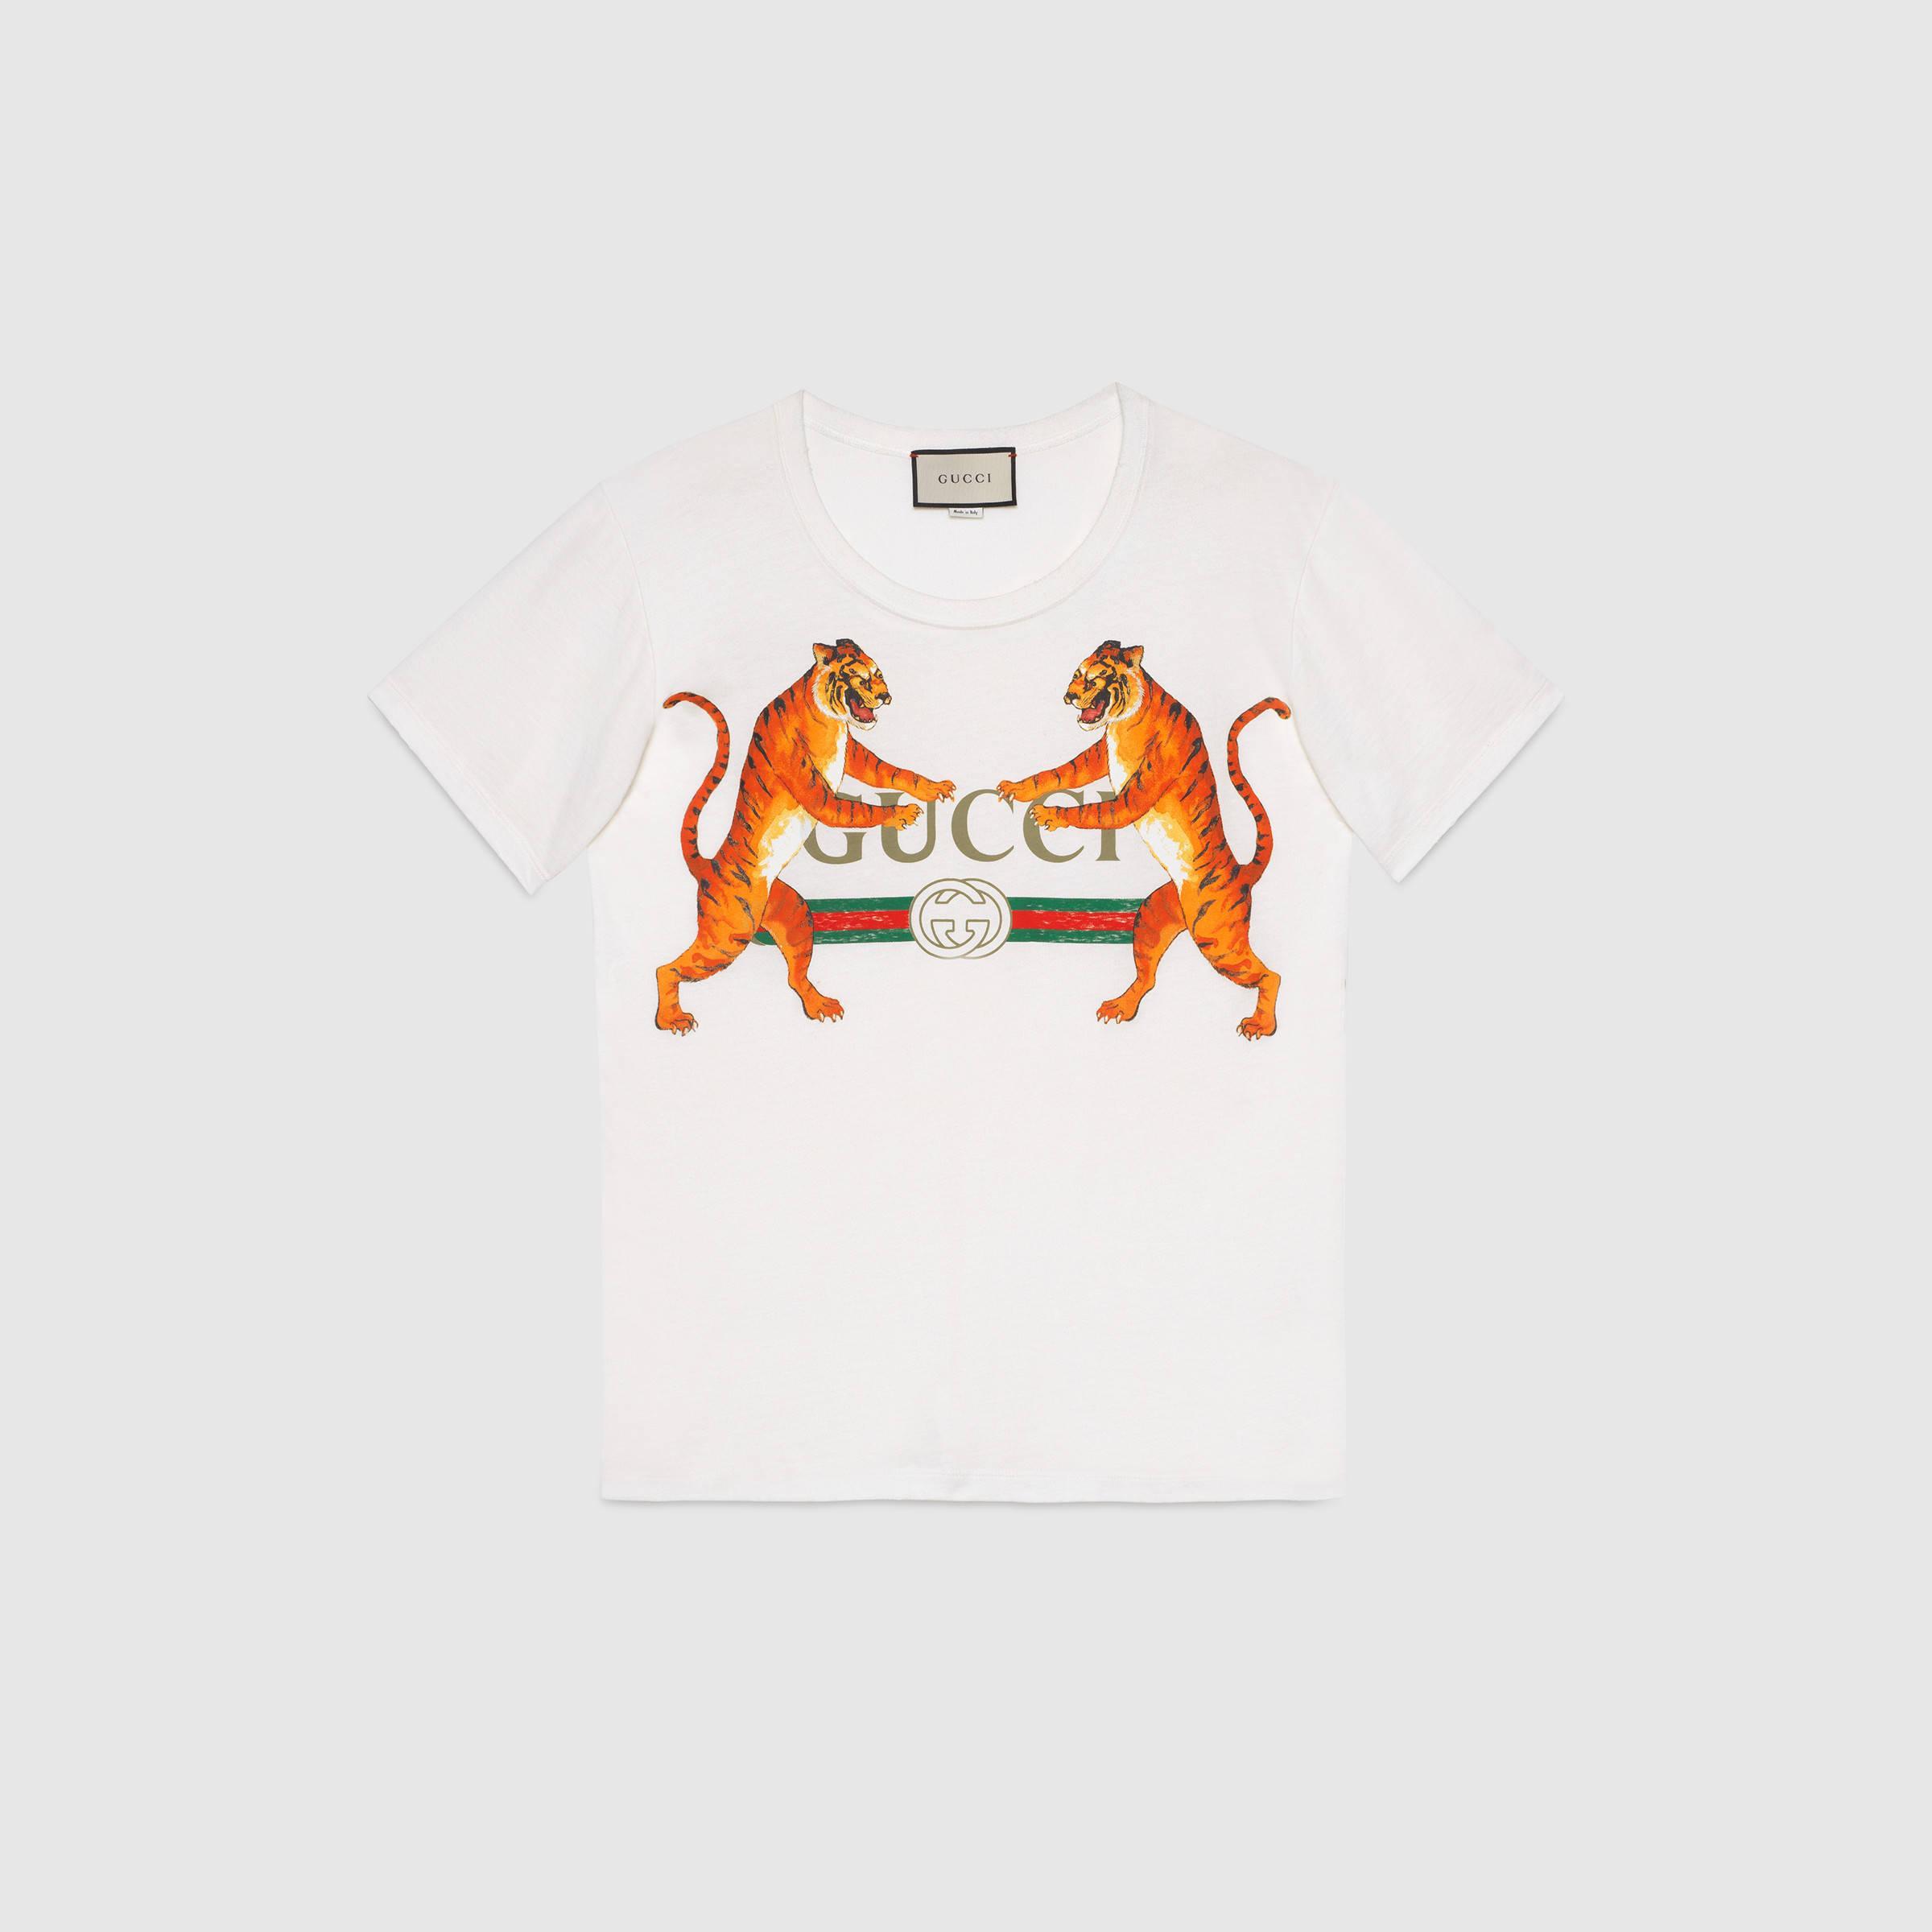 Real Gucci Logo - Discount Real Gucci Gucci Logo With Tigers T Shirt : Cheap